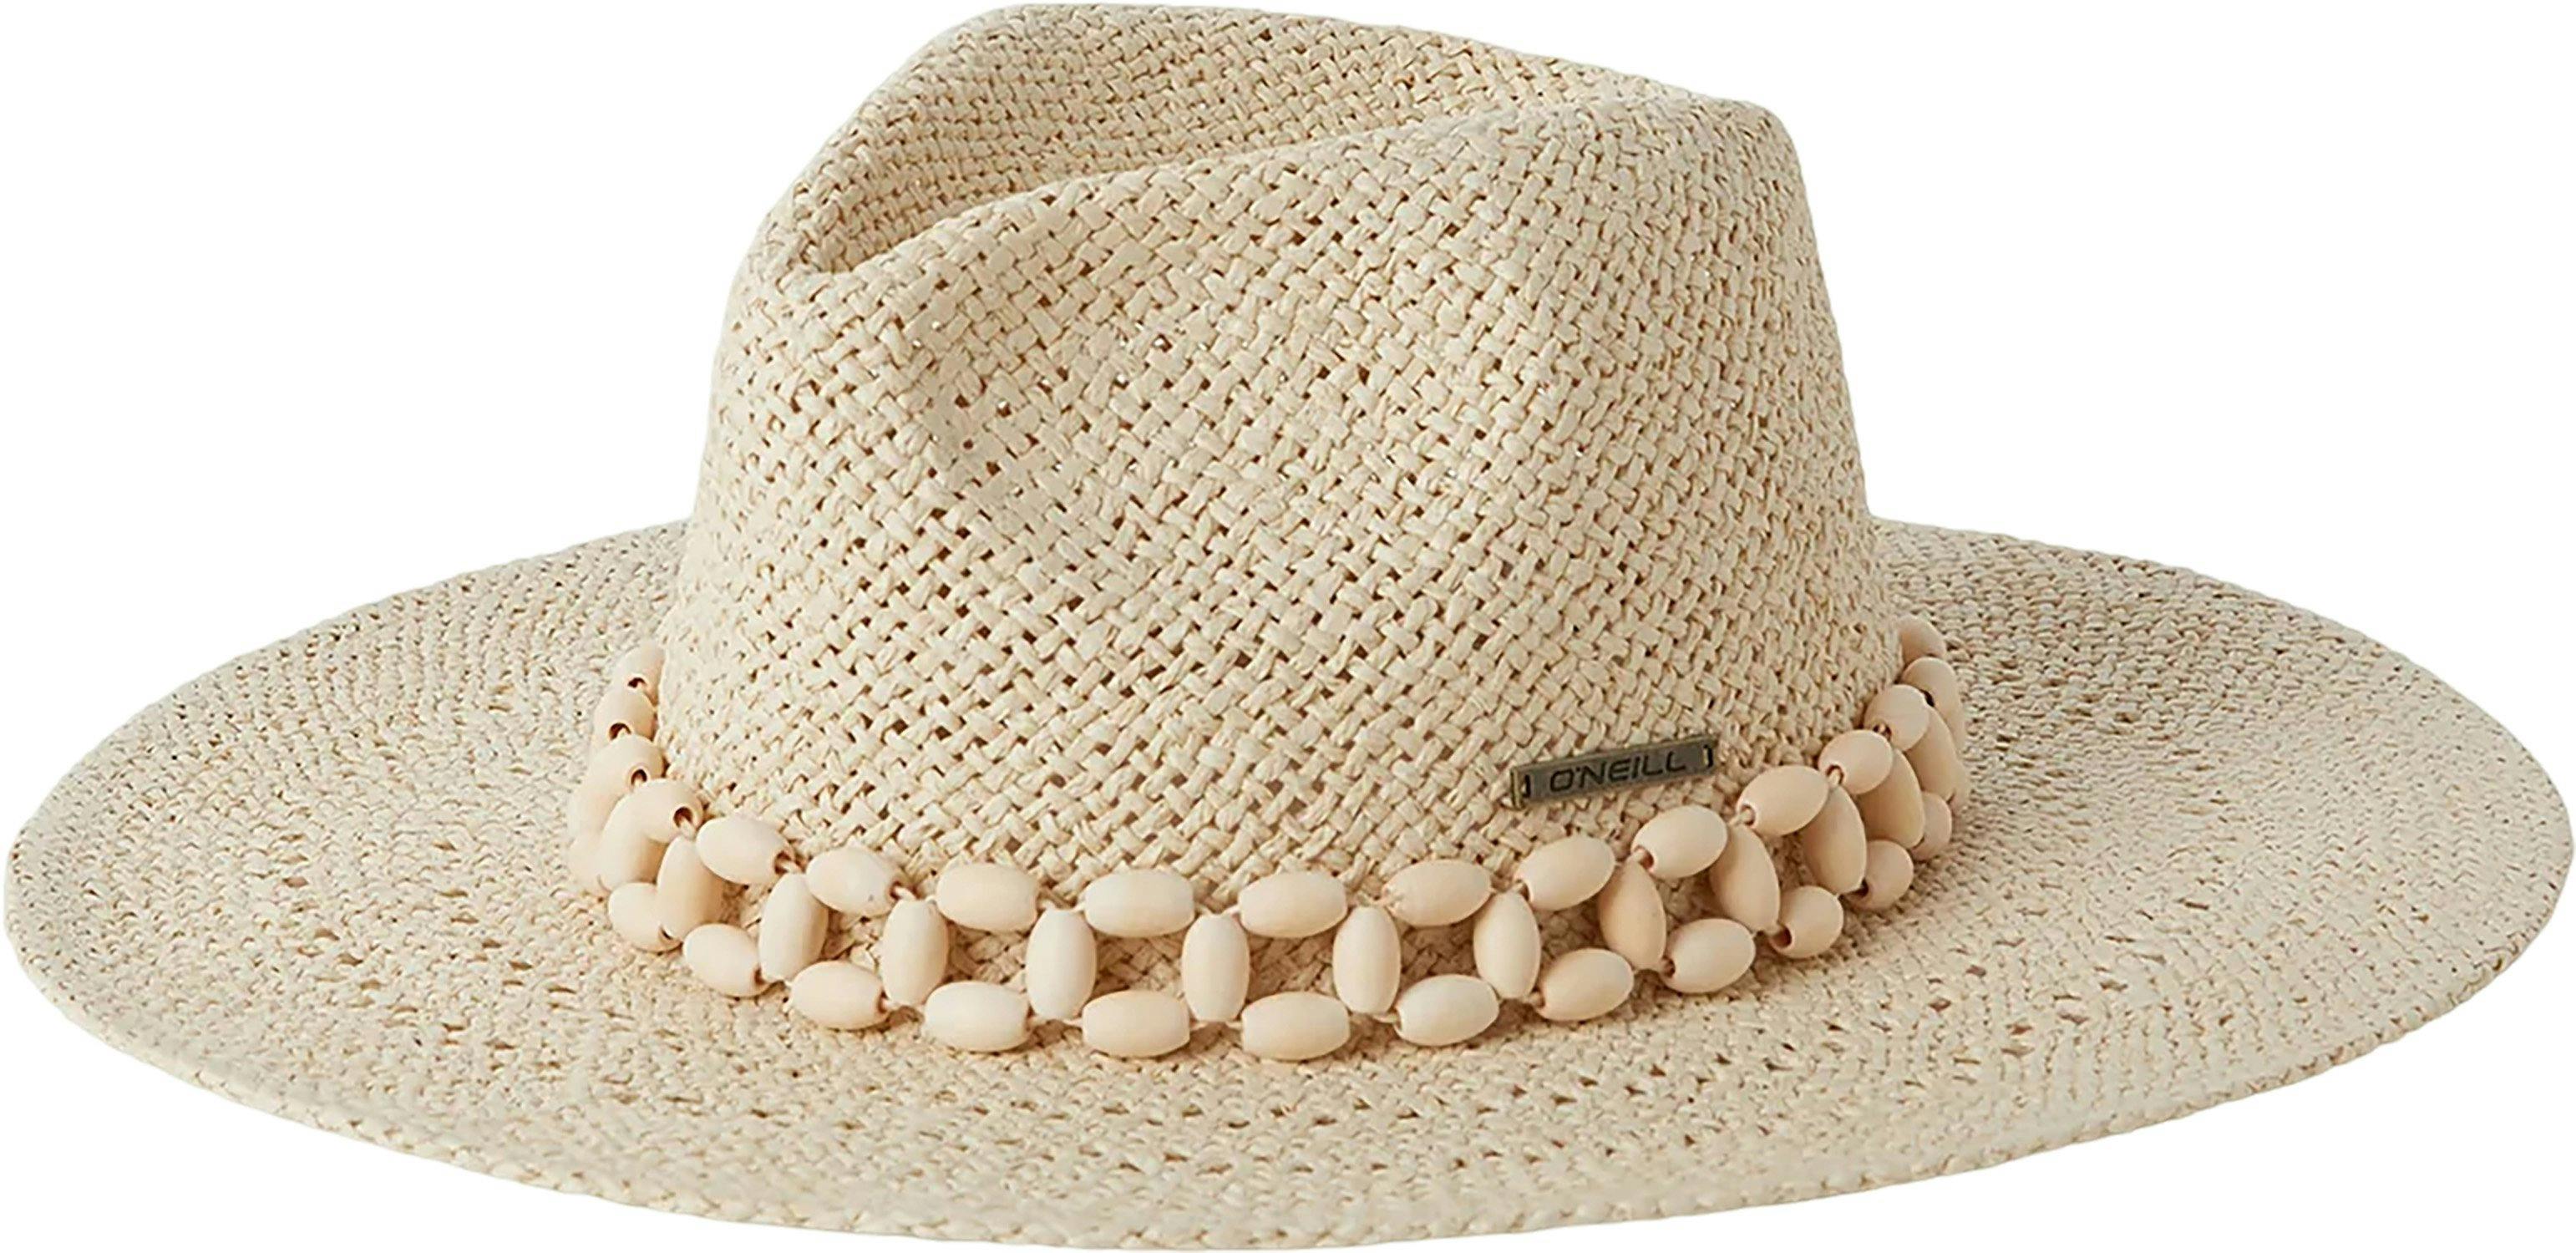 Product image for Magic Bay Sun Hat - Women's